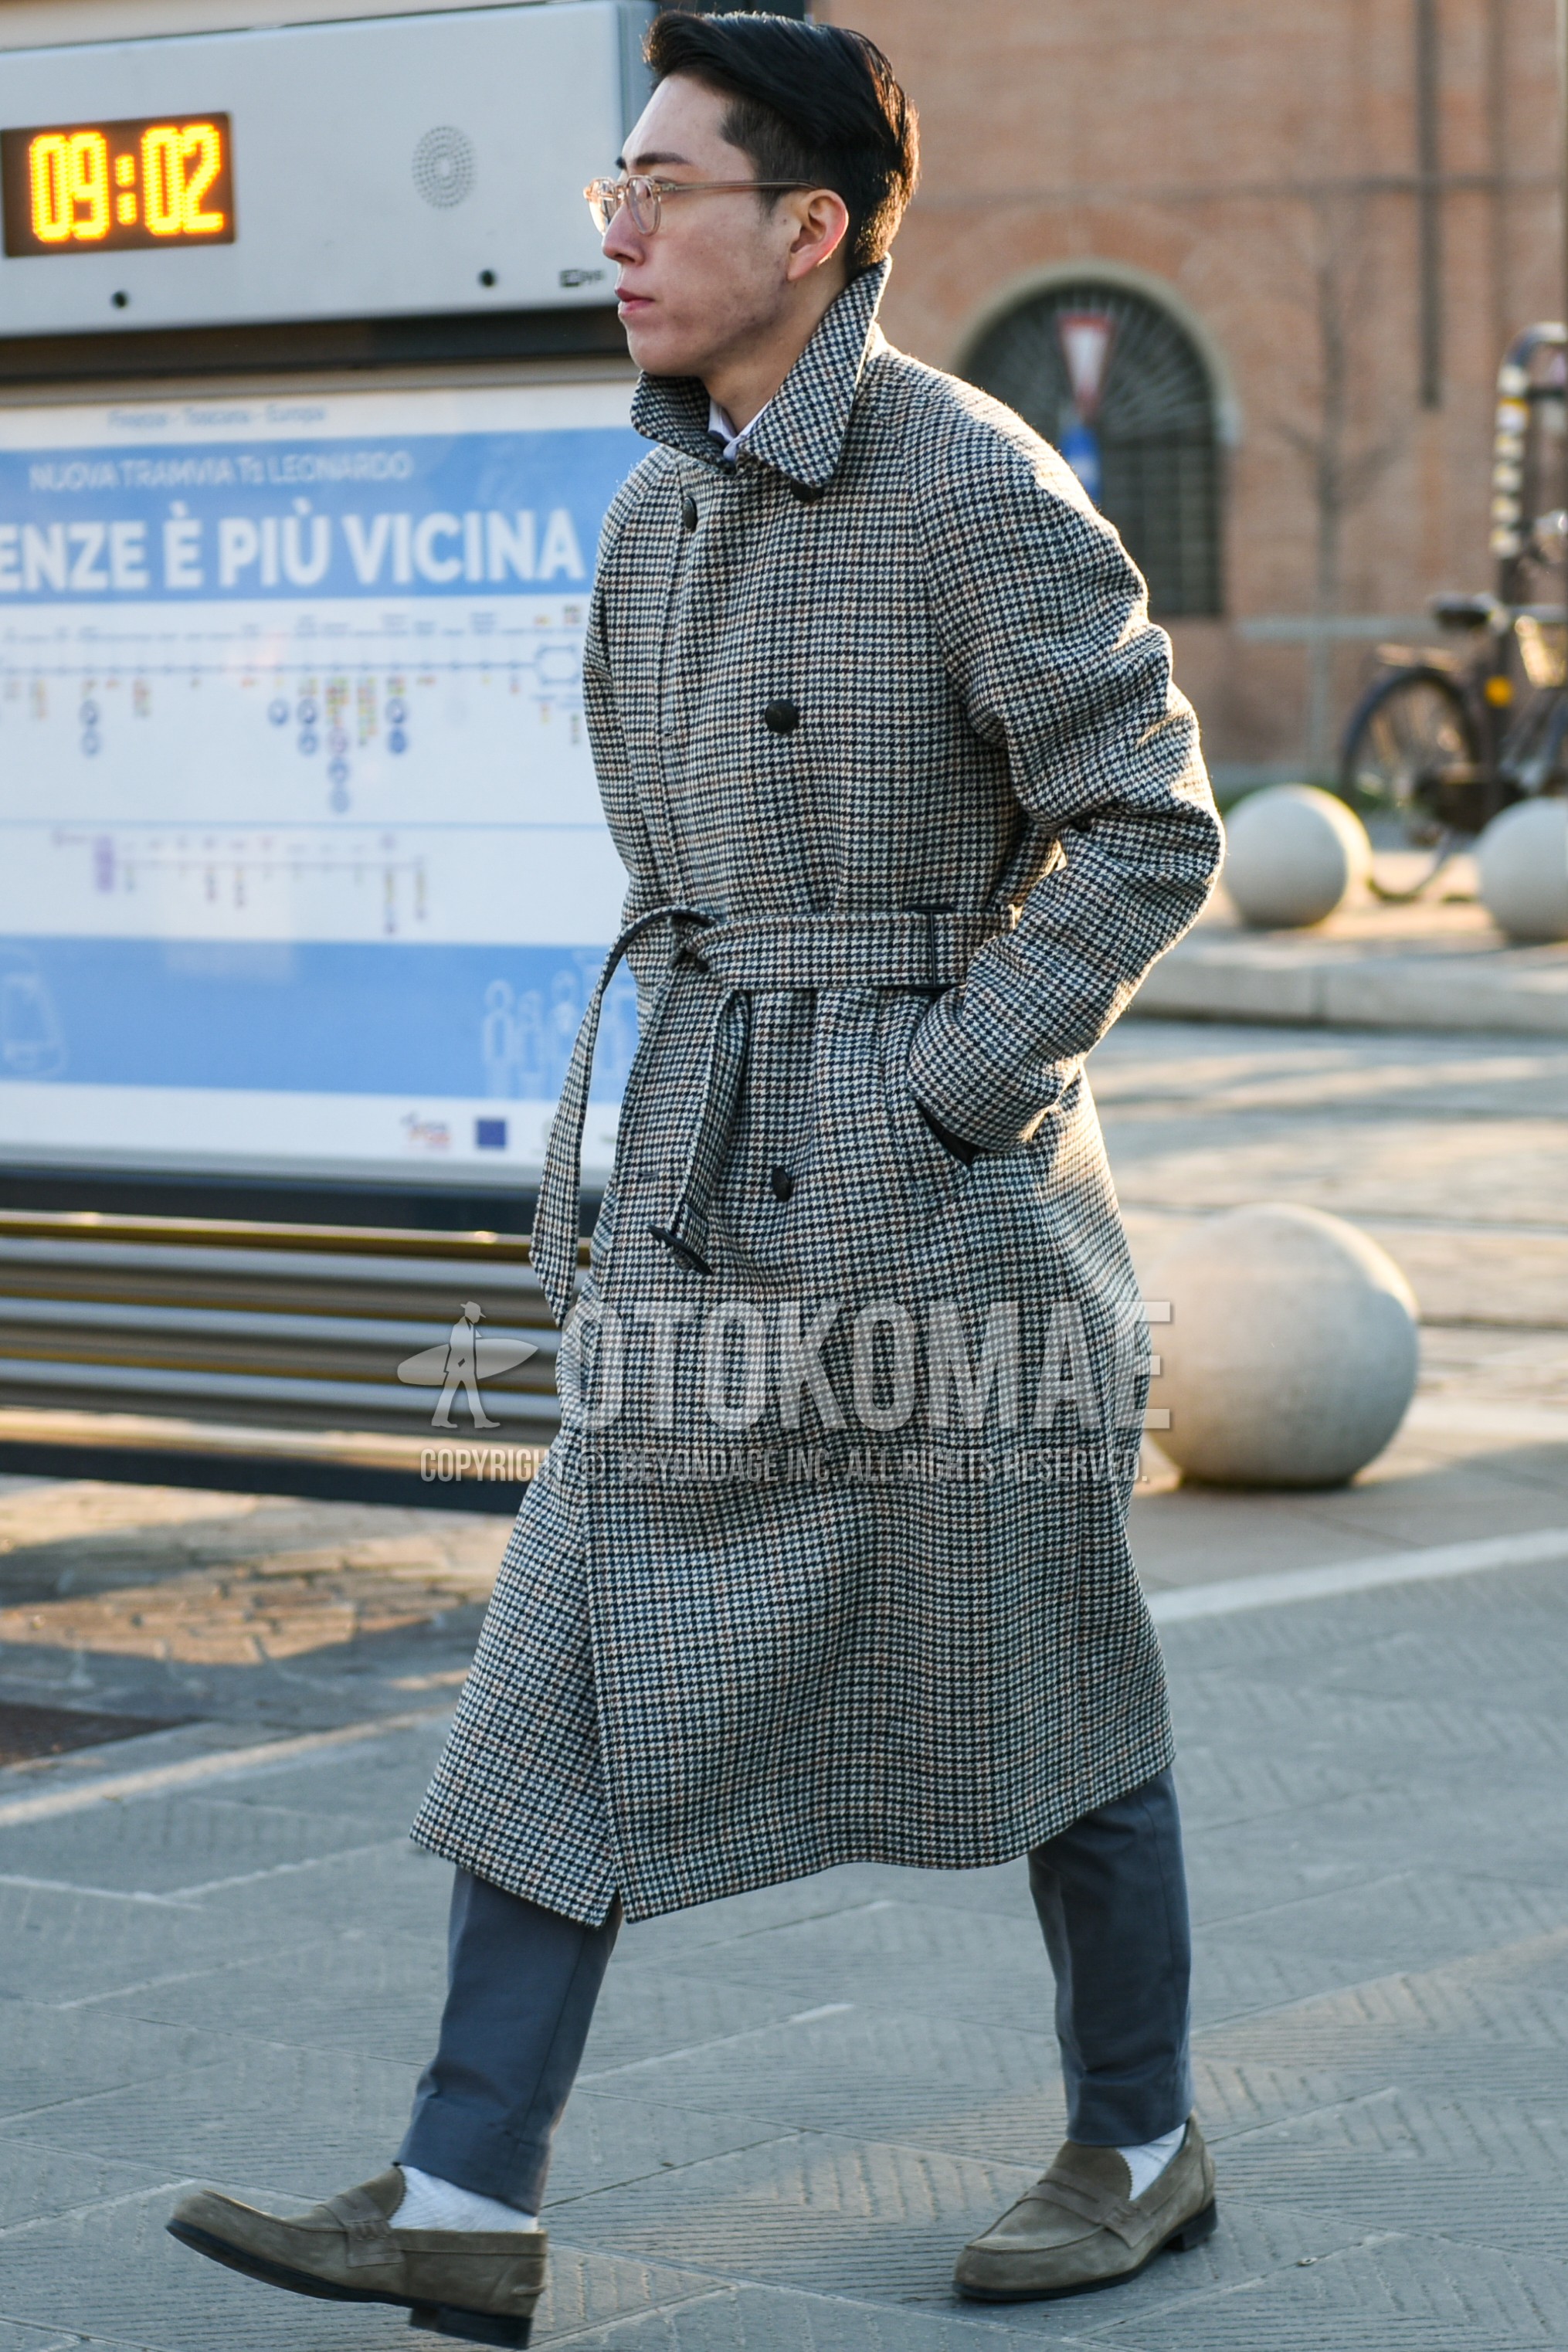 Men's autumn winter outfit with gray check trench coat, gray plain slacks, white plain socks, beige coin loafers leather shoes.